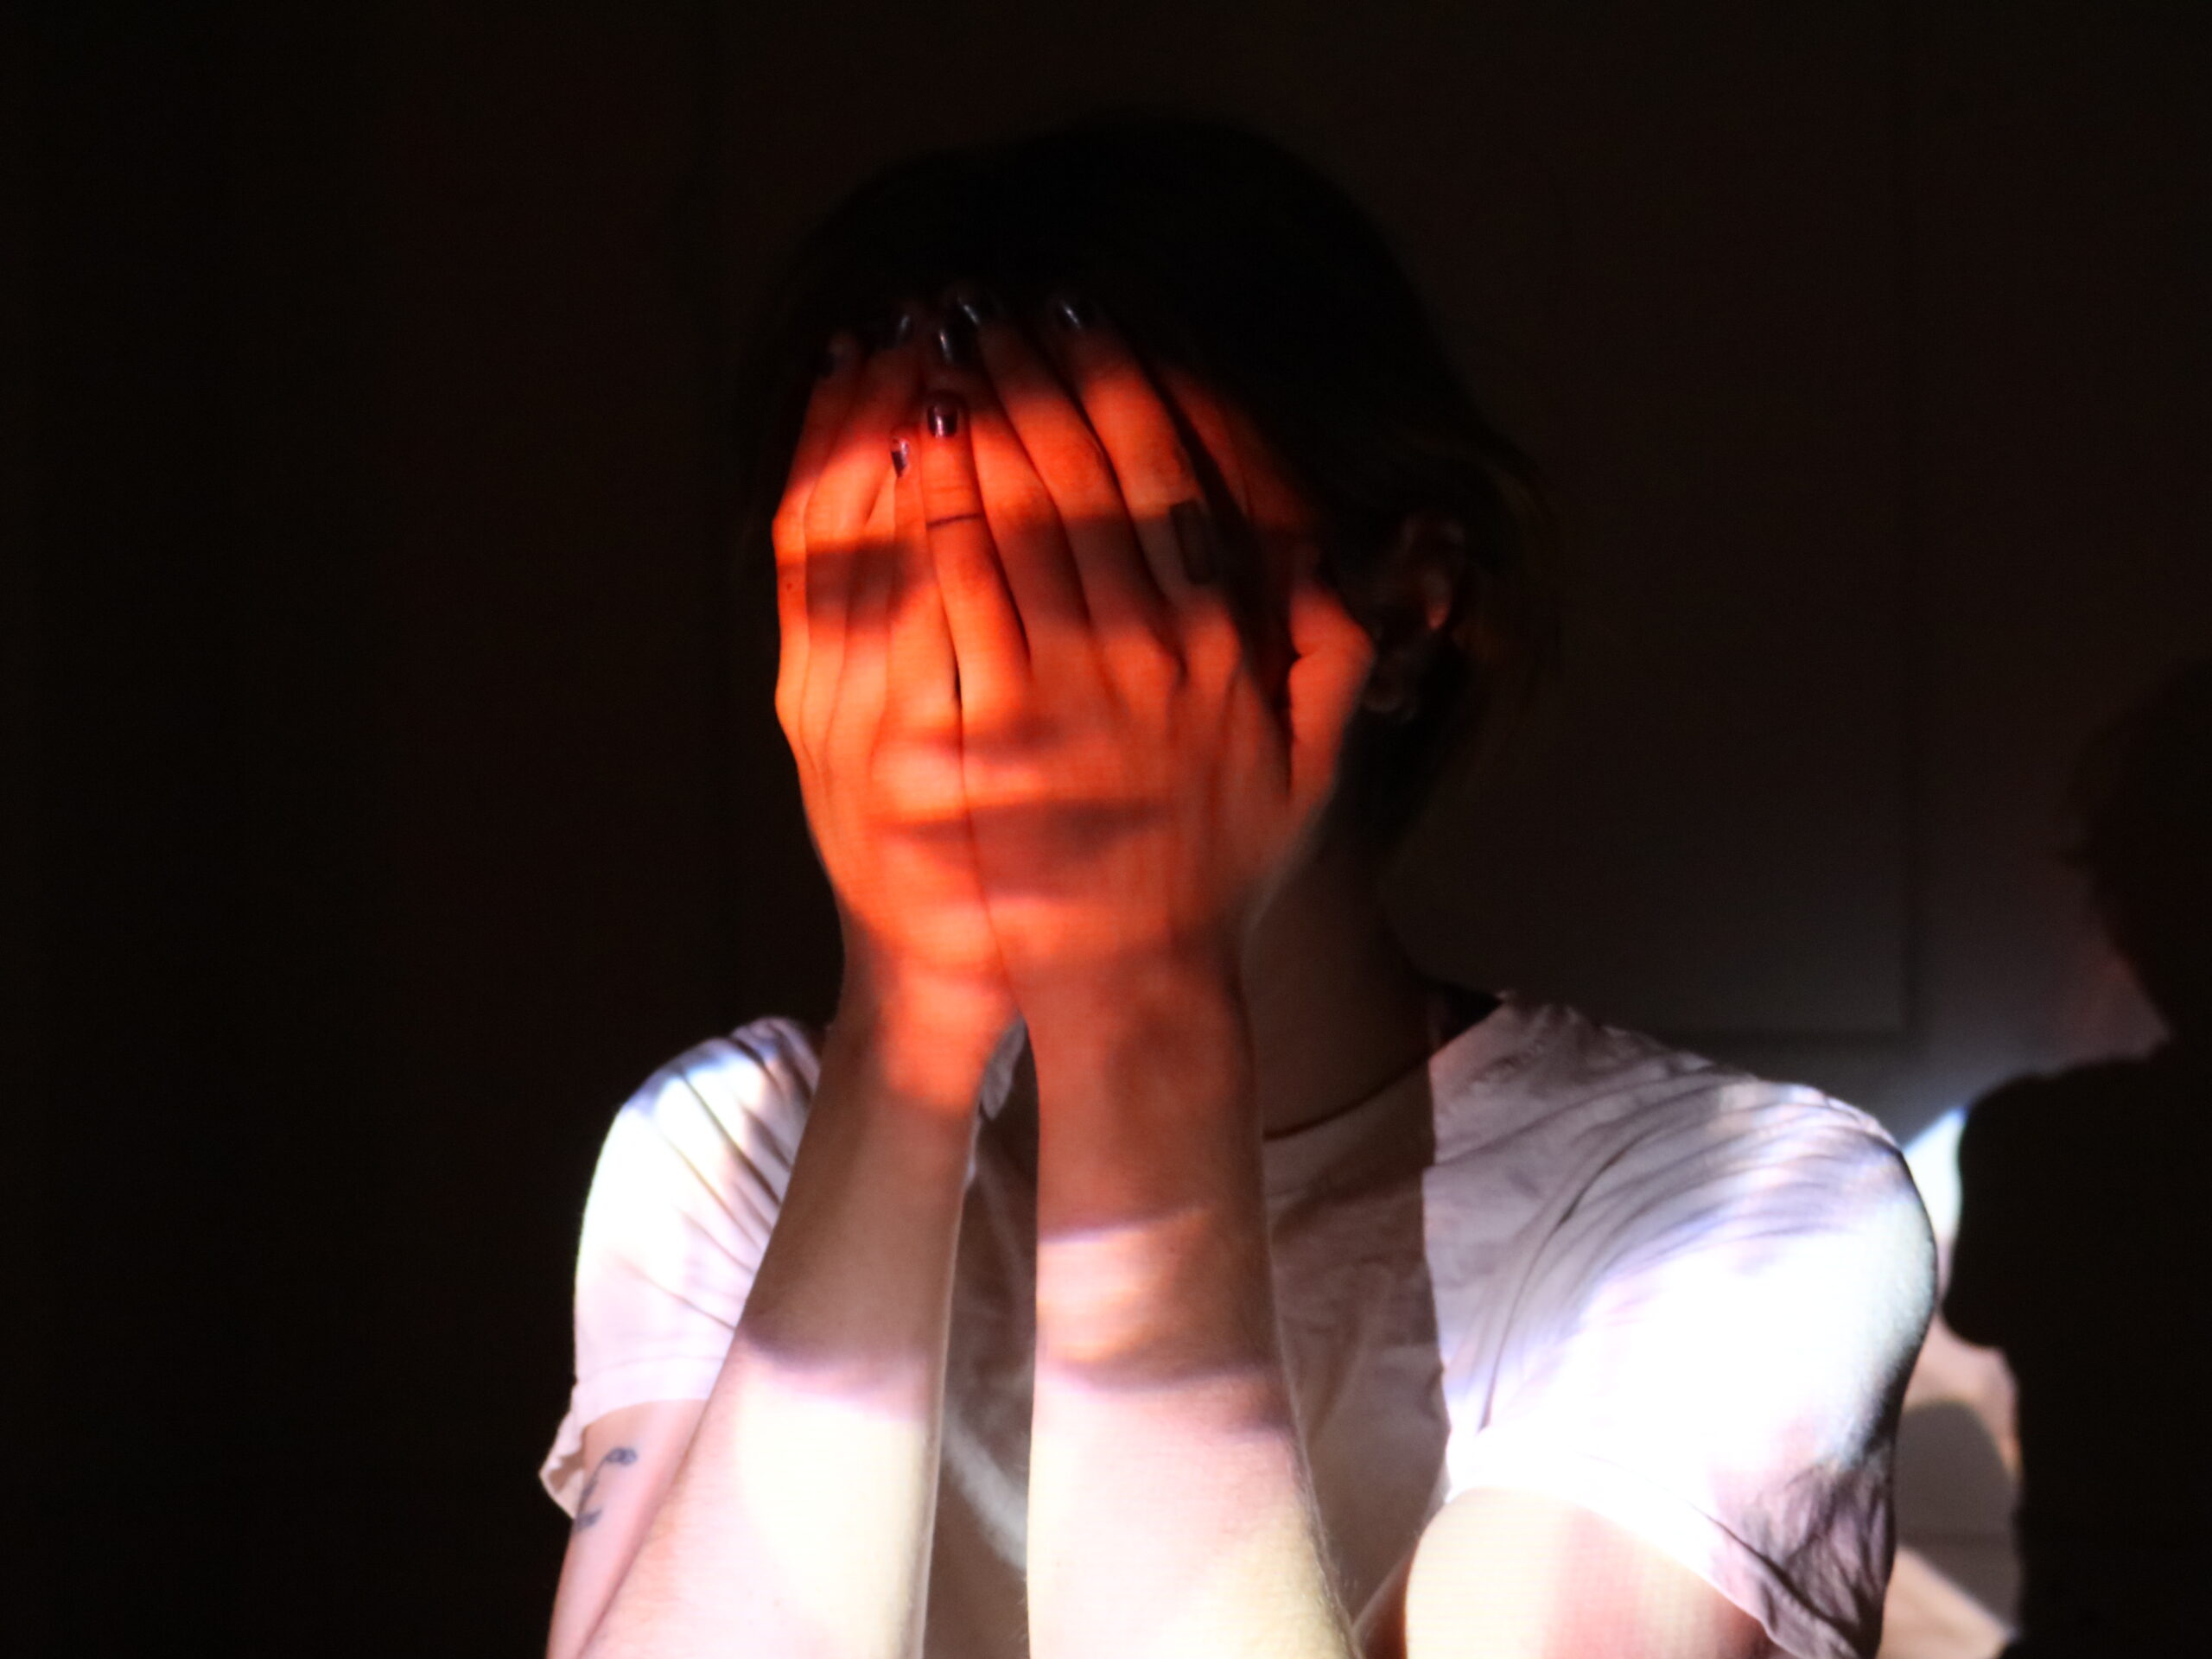 Person with light skin covers their face with their hands, while image of face is projected onto their hands.